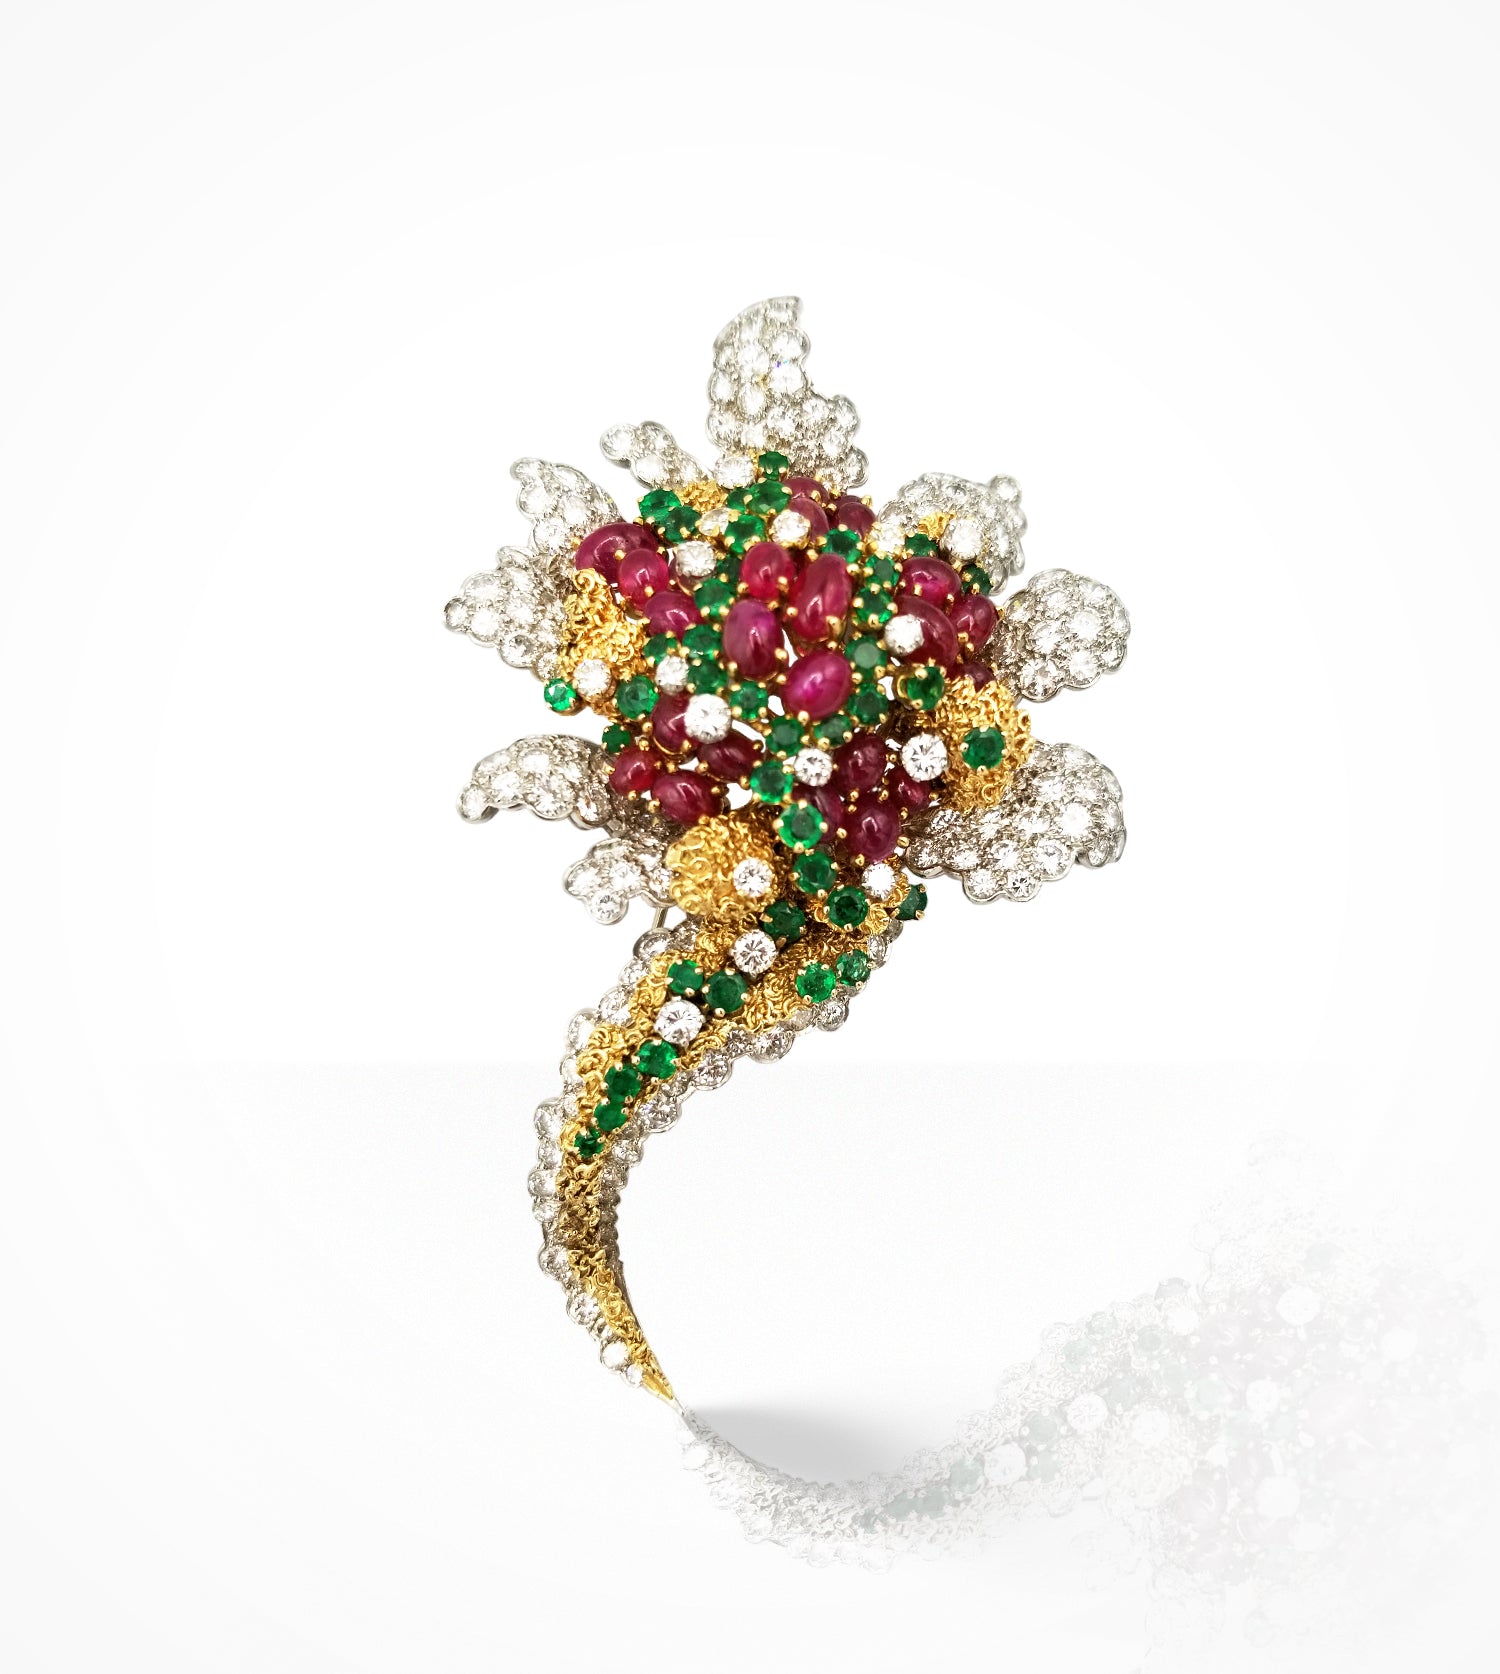 1100406 Estate 1100406 Platinum and 18kt yellow gold Ruby, Emeralds and diamond Brooch. Price upon request.